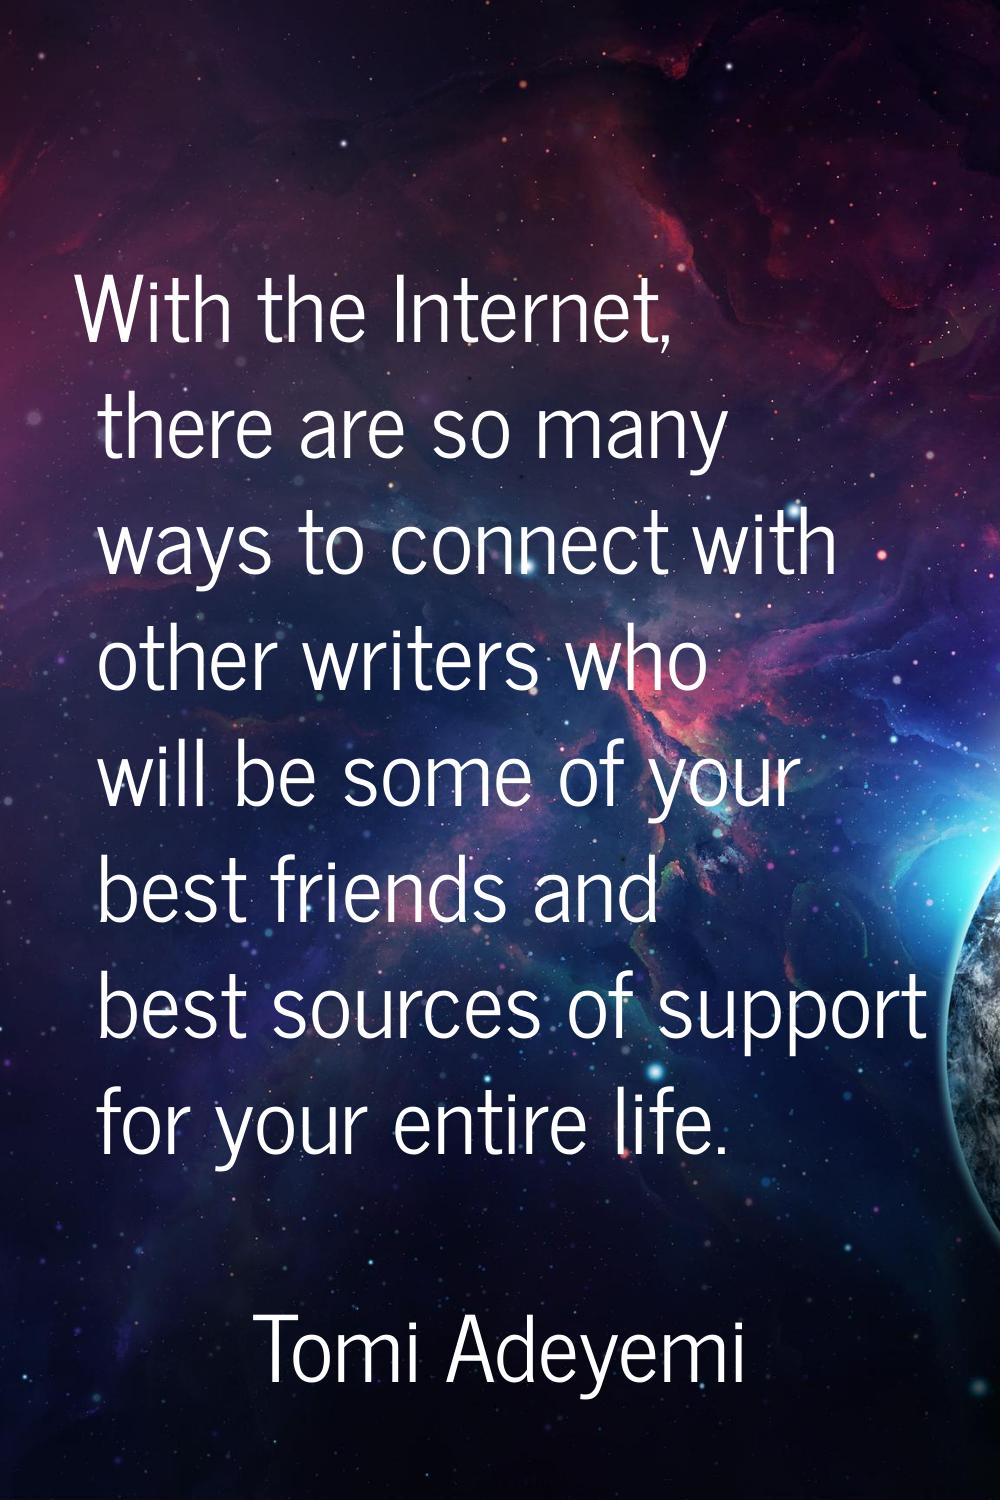 With the Internet, there are so many ways to connect with other writers who will be some of your be